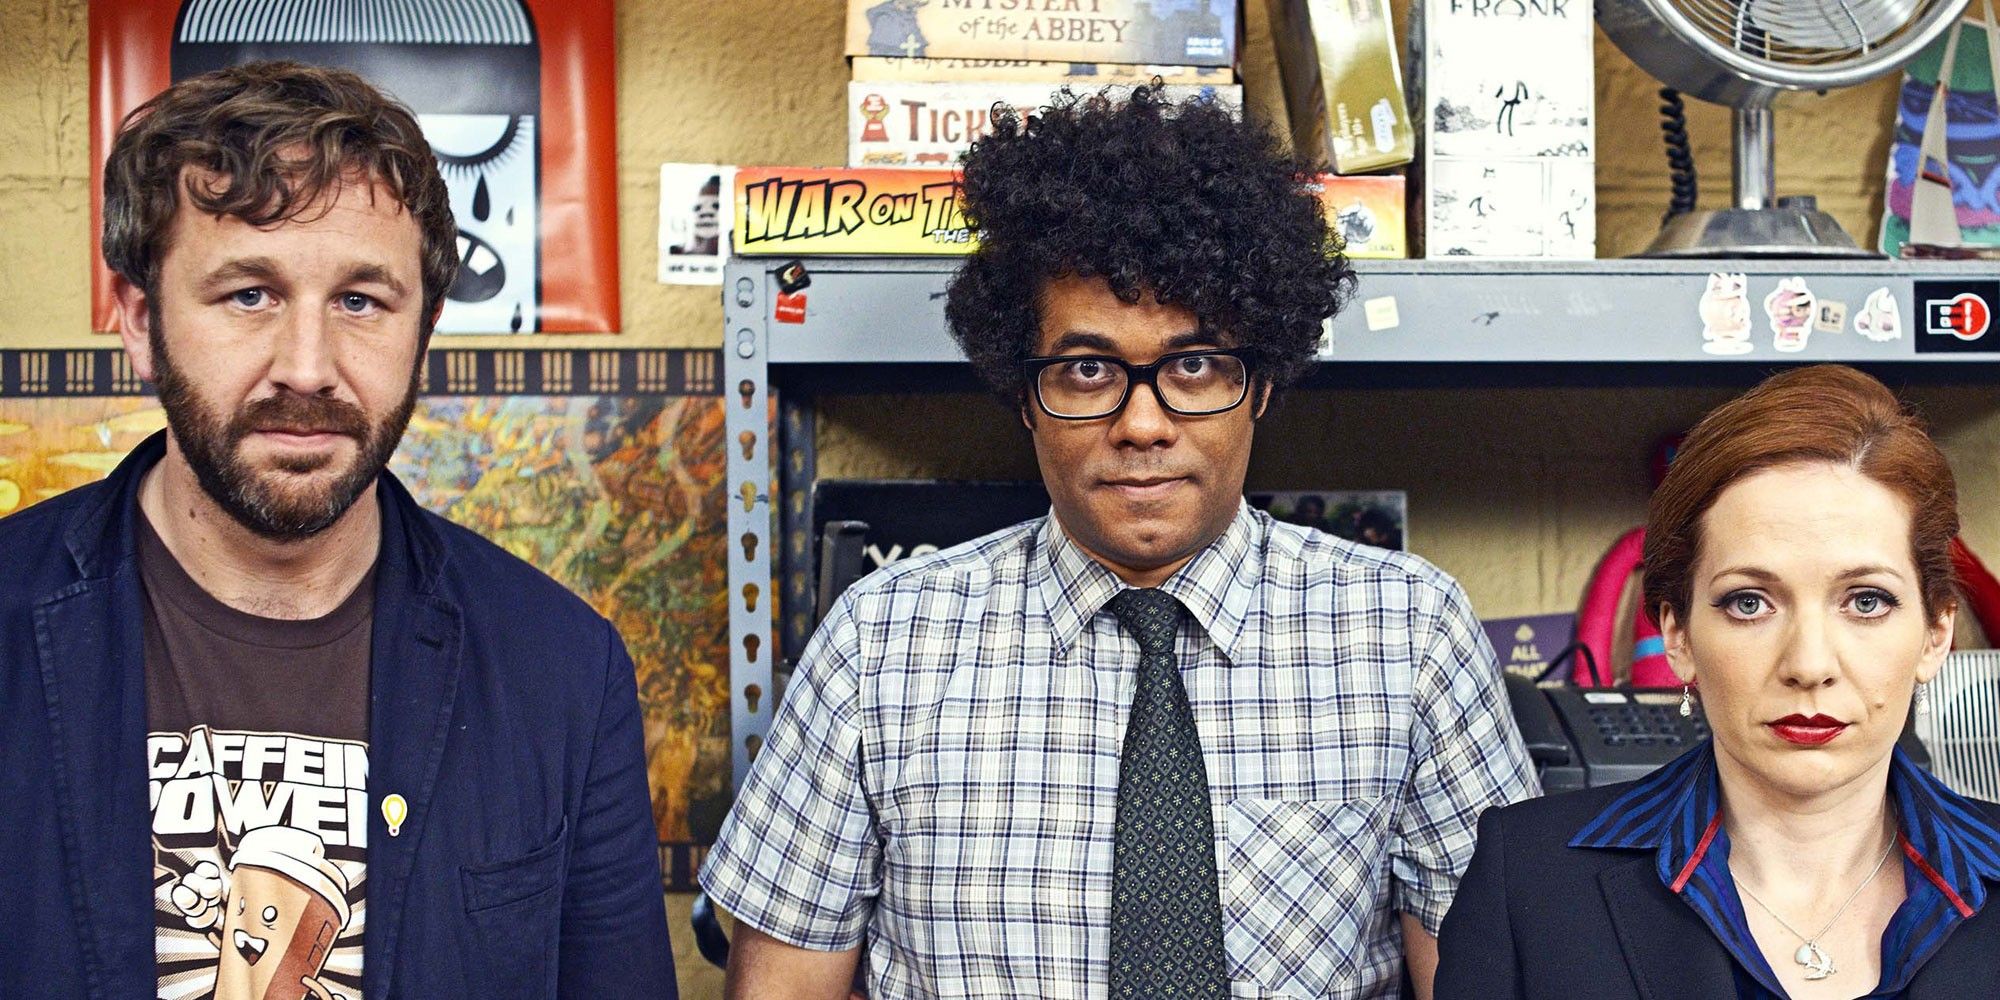 Chris O'Dowd as Roy, Richard Ayoade as Moss and Katherine Parkinson as Jen in The IT Crowd